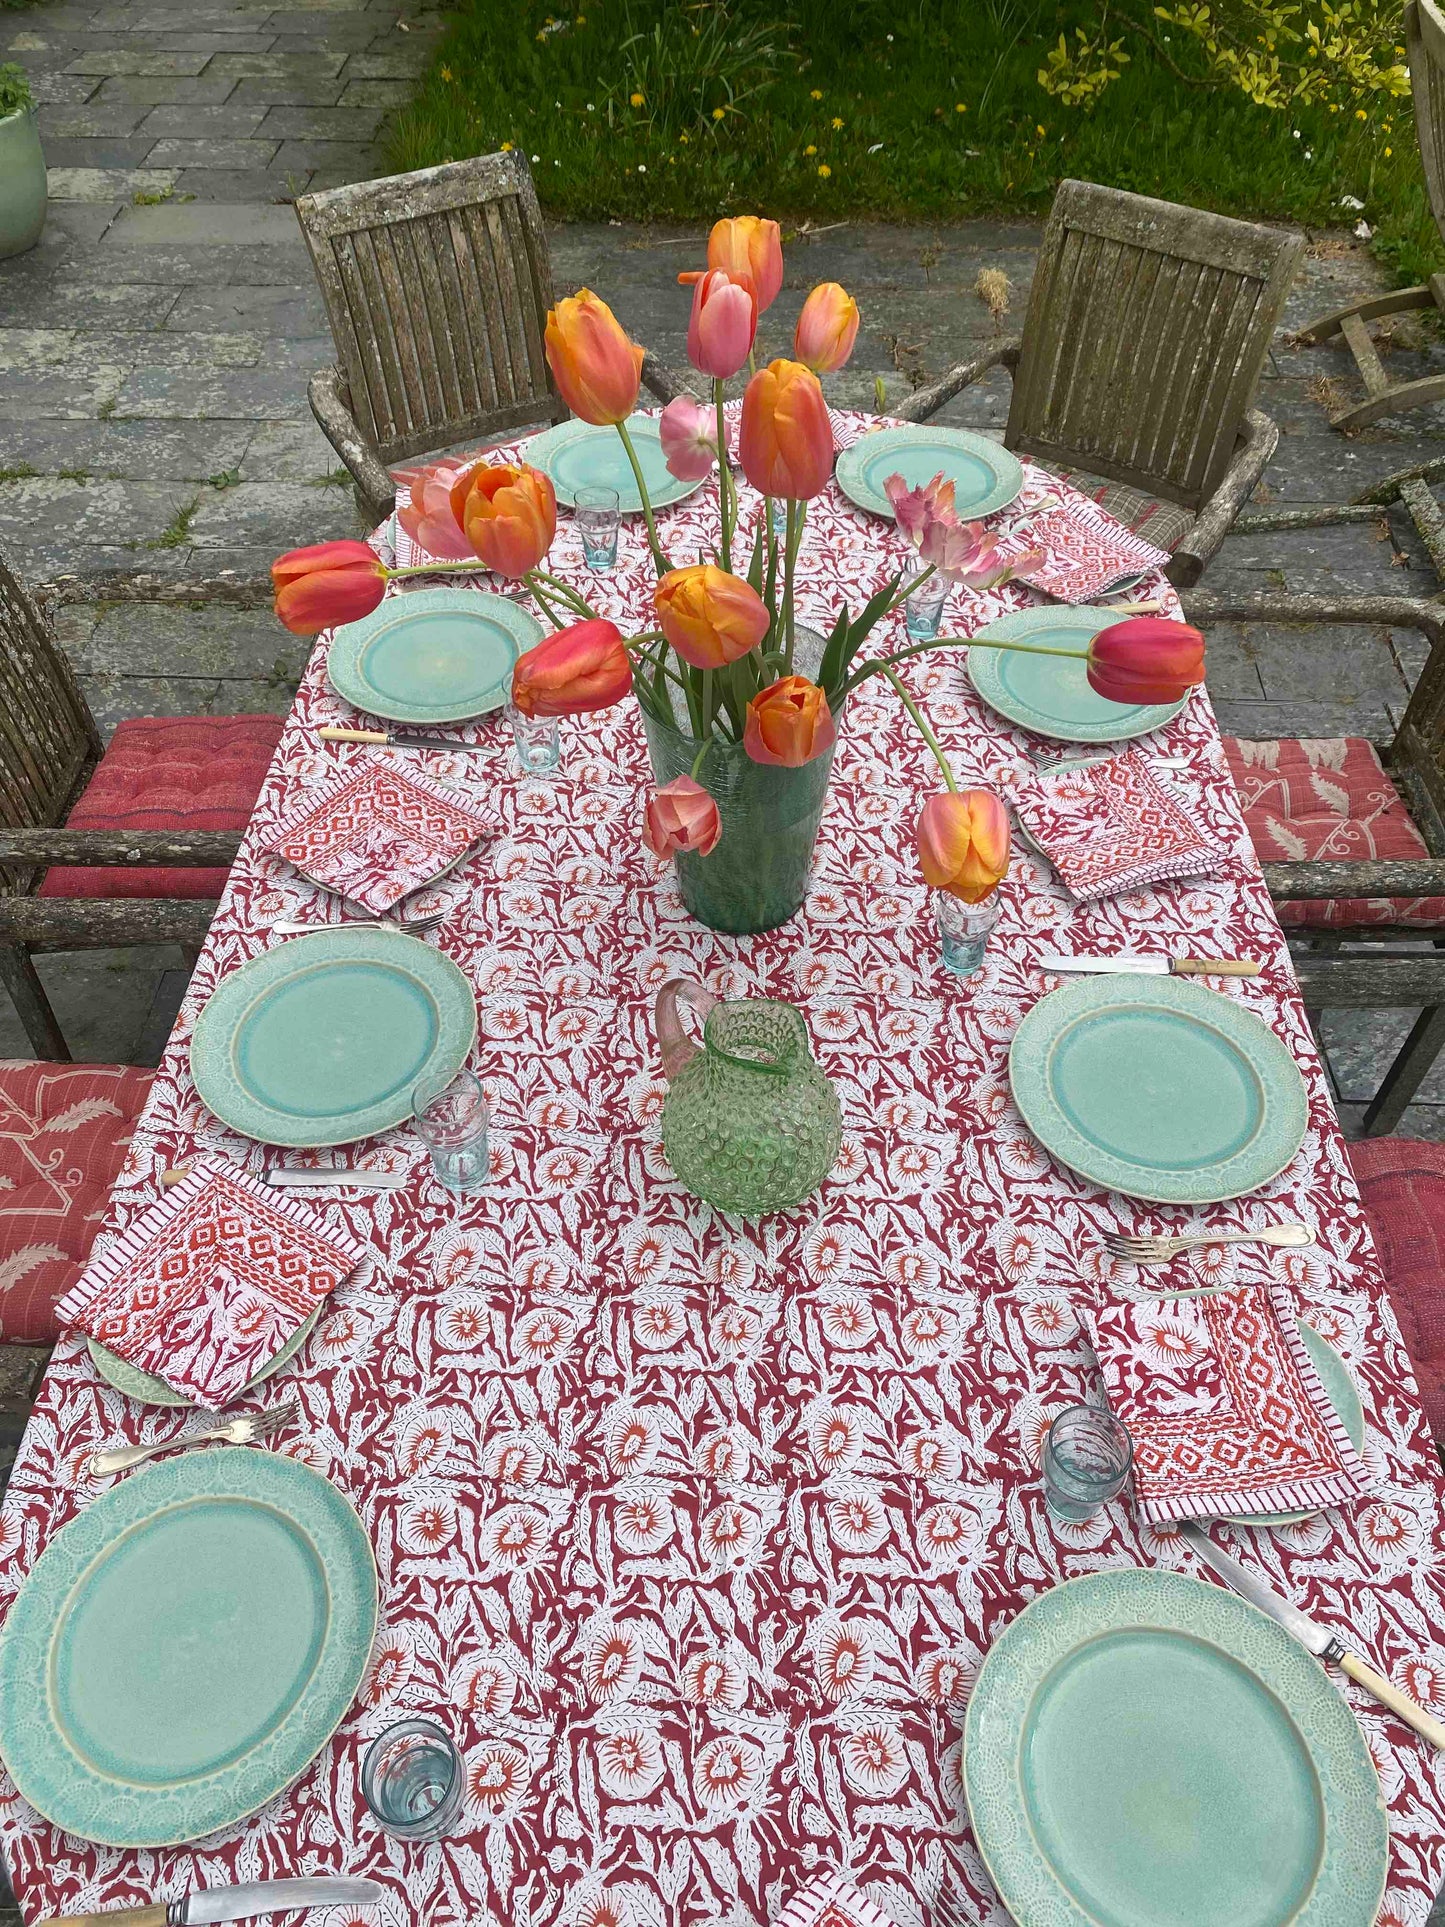 Tablescape with red and orange tablecloth